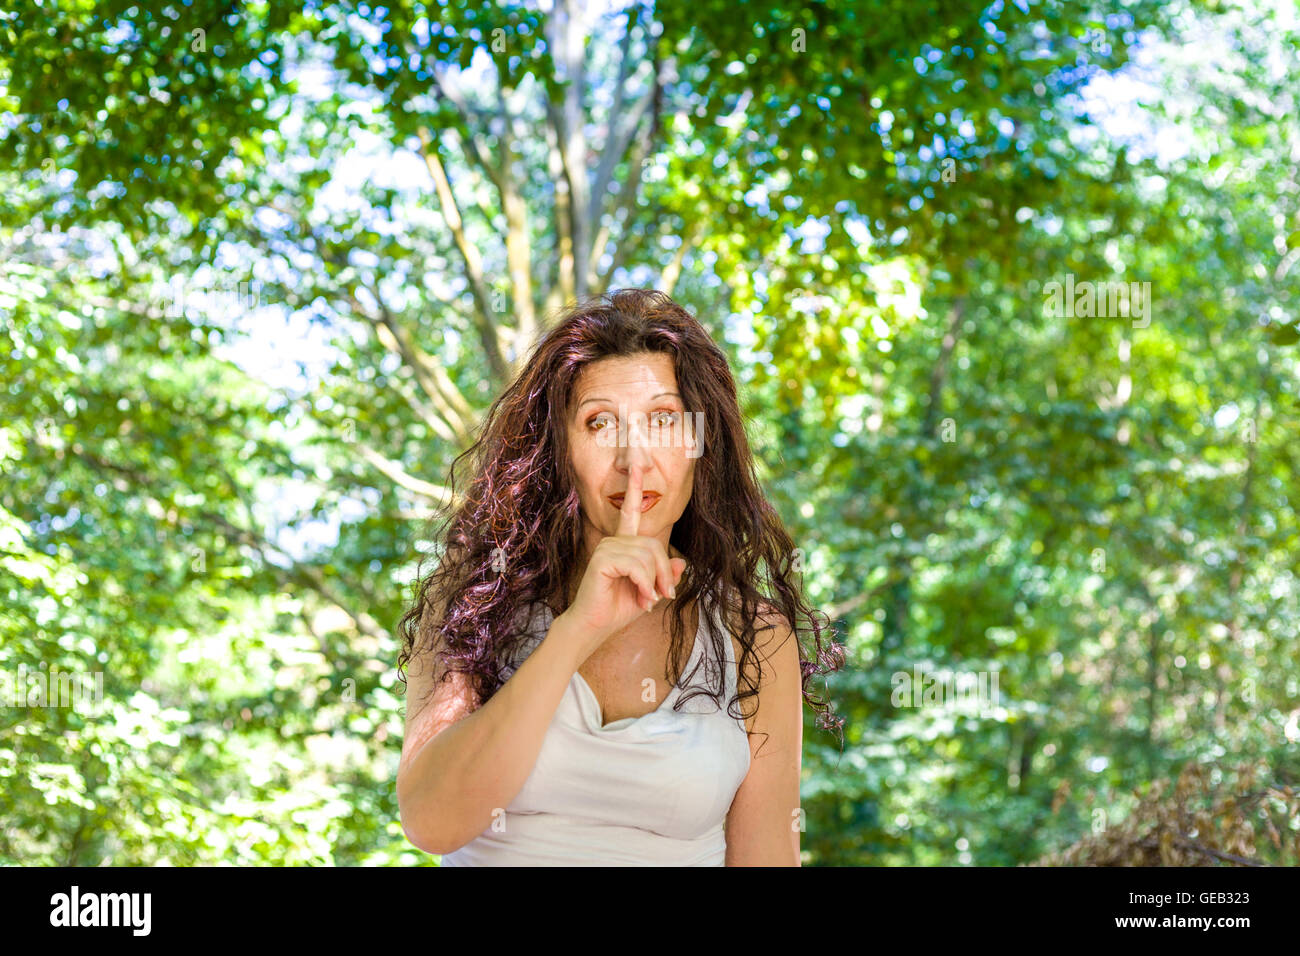 Curvy classy mature woman puts index finger to lips asking for silence in a garden Stock Photo